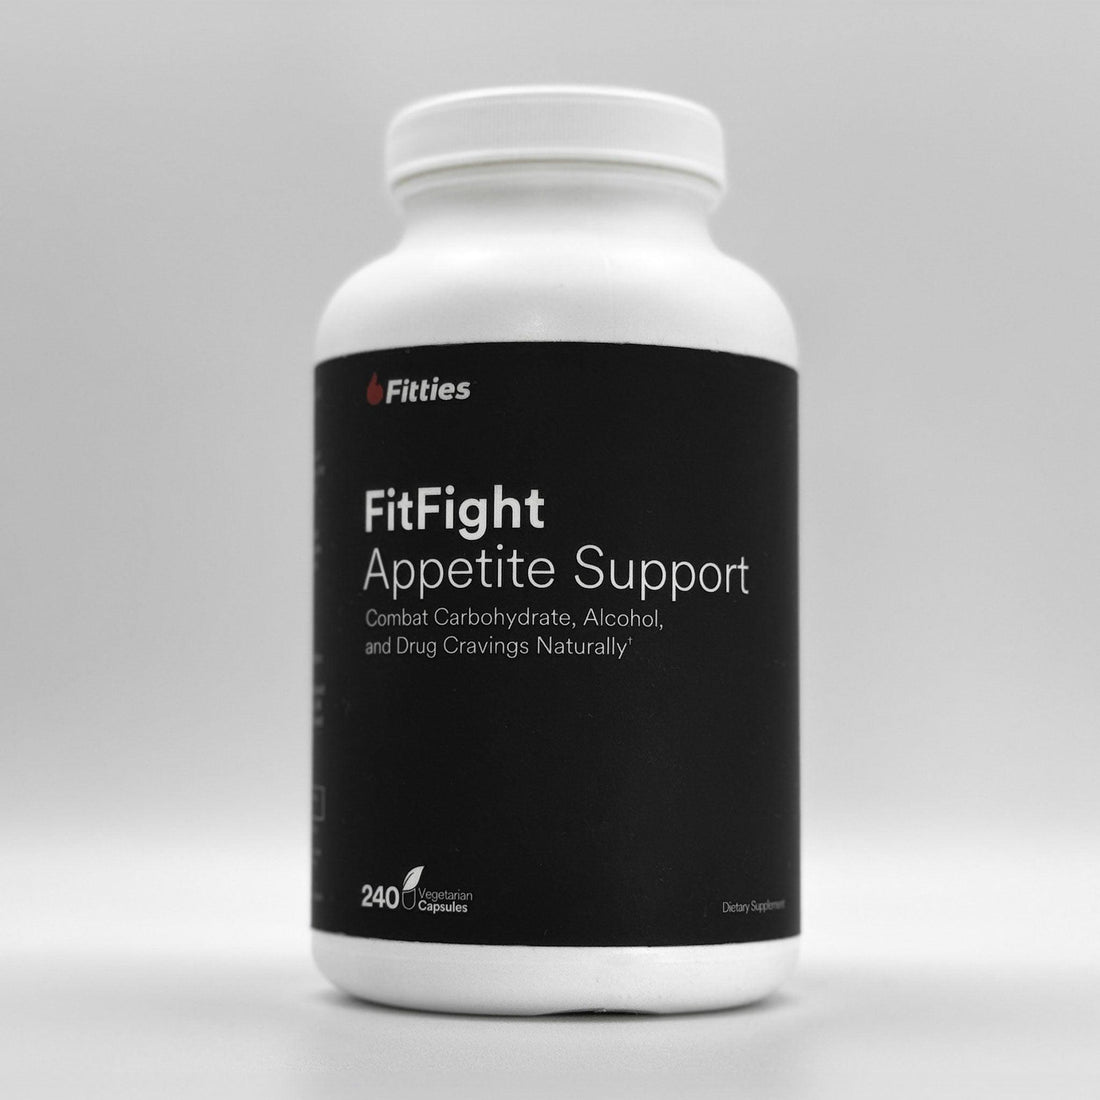 Fitties FitFight front label